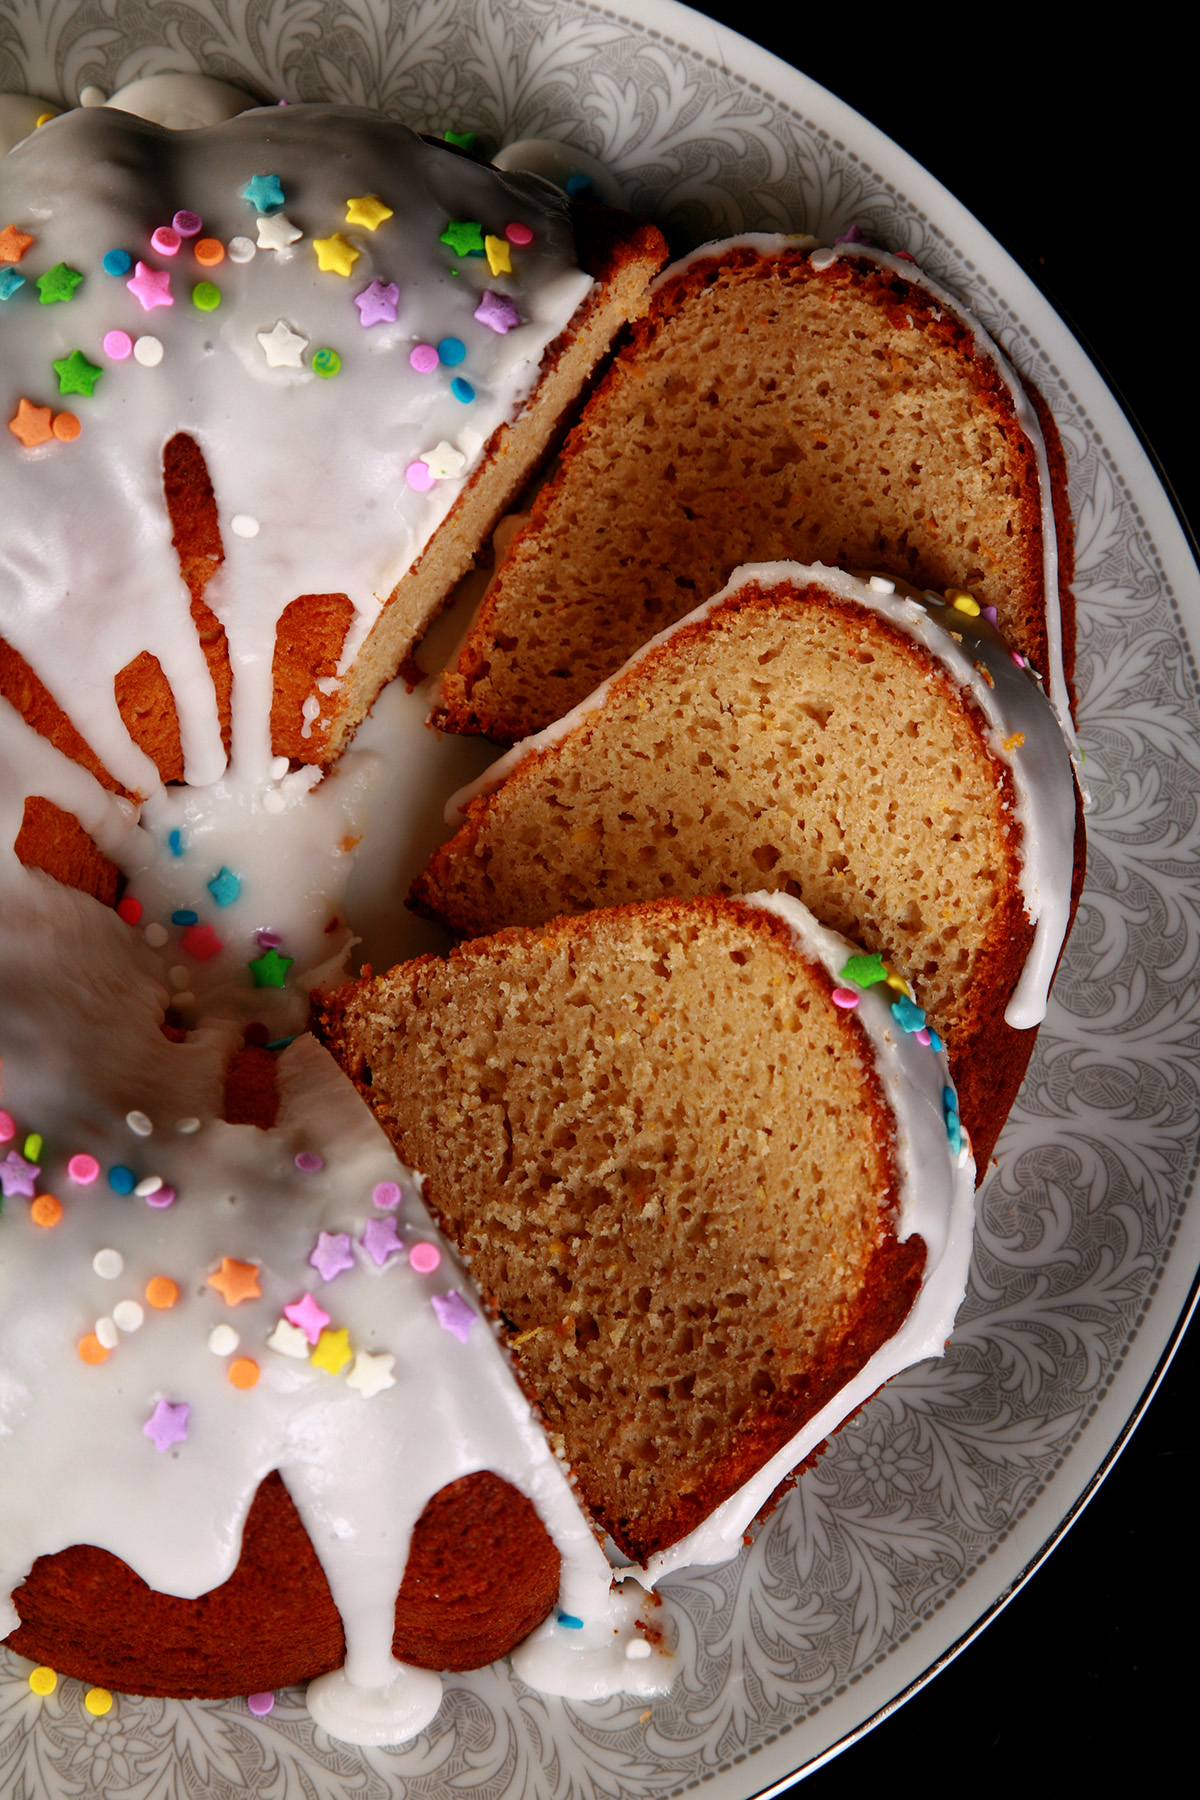 A close up view of a gluten-free paska. It's in the shape of a bundt pan, with dripping white glaze and topped with pastel coloured sprinkles. A section has been sliced, the slices are fanned out on the plate.